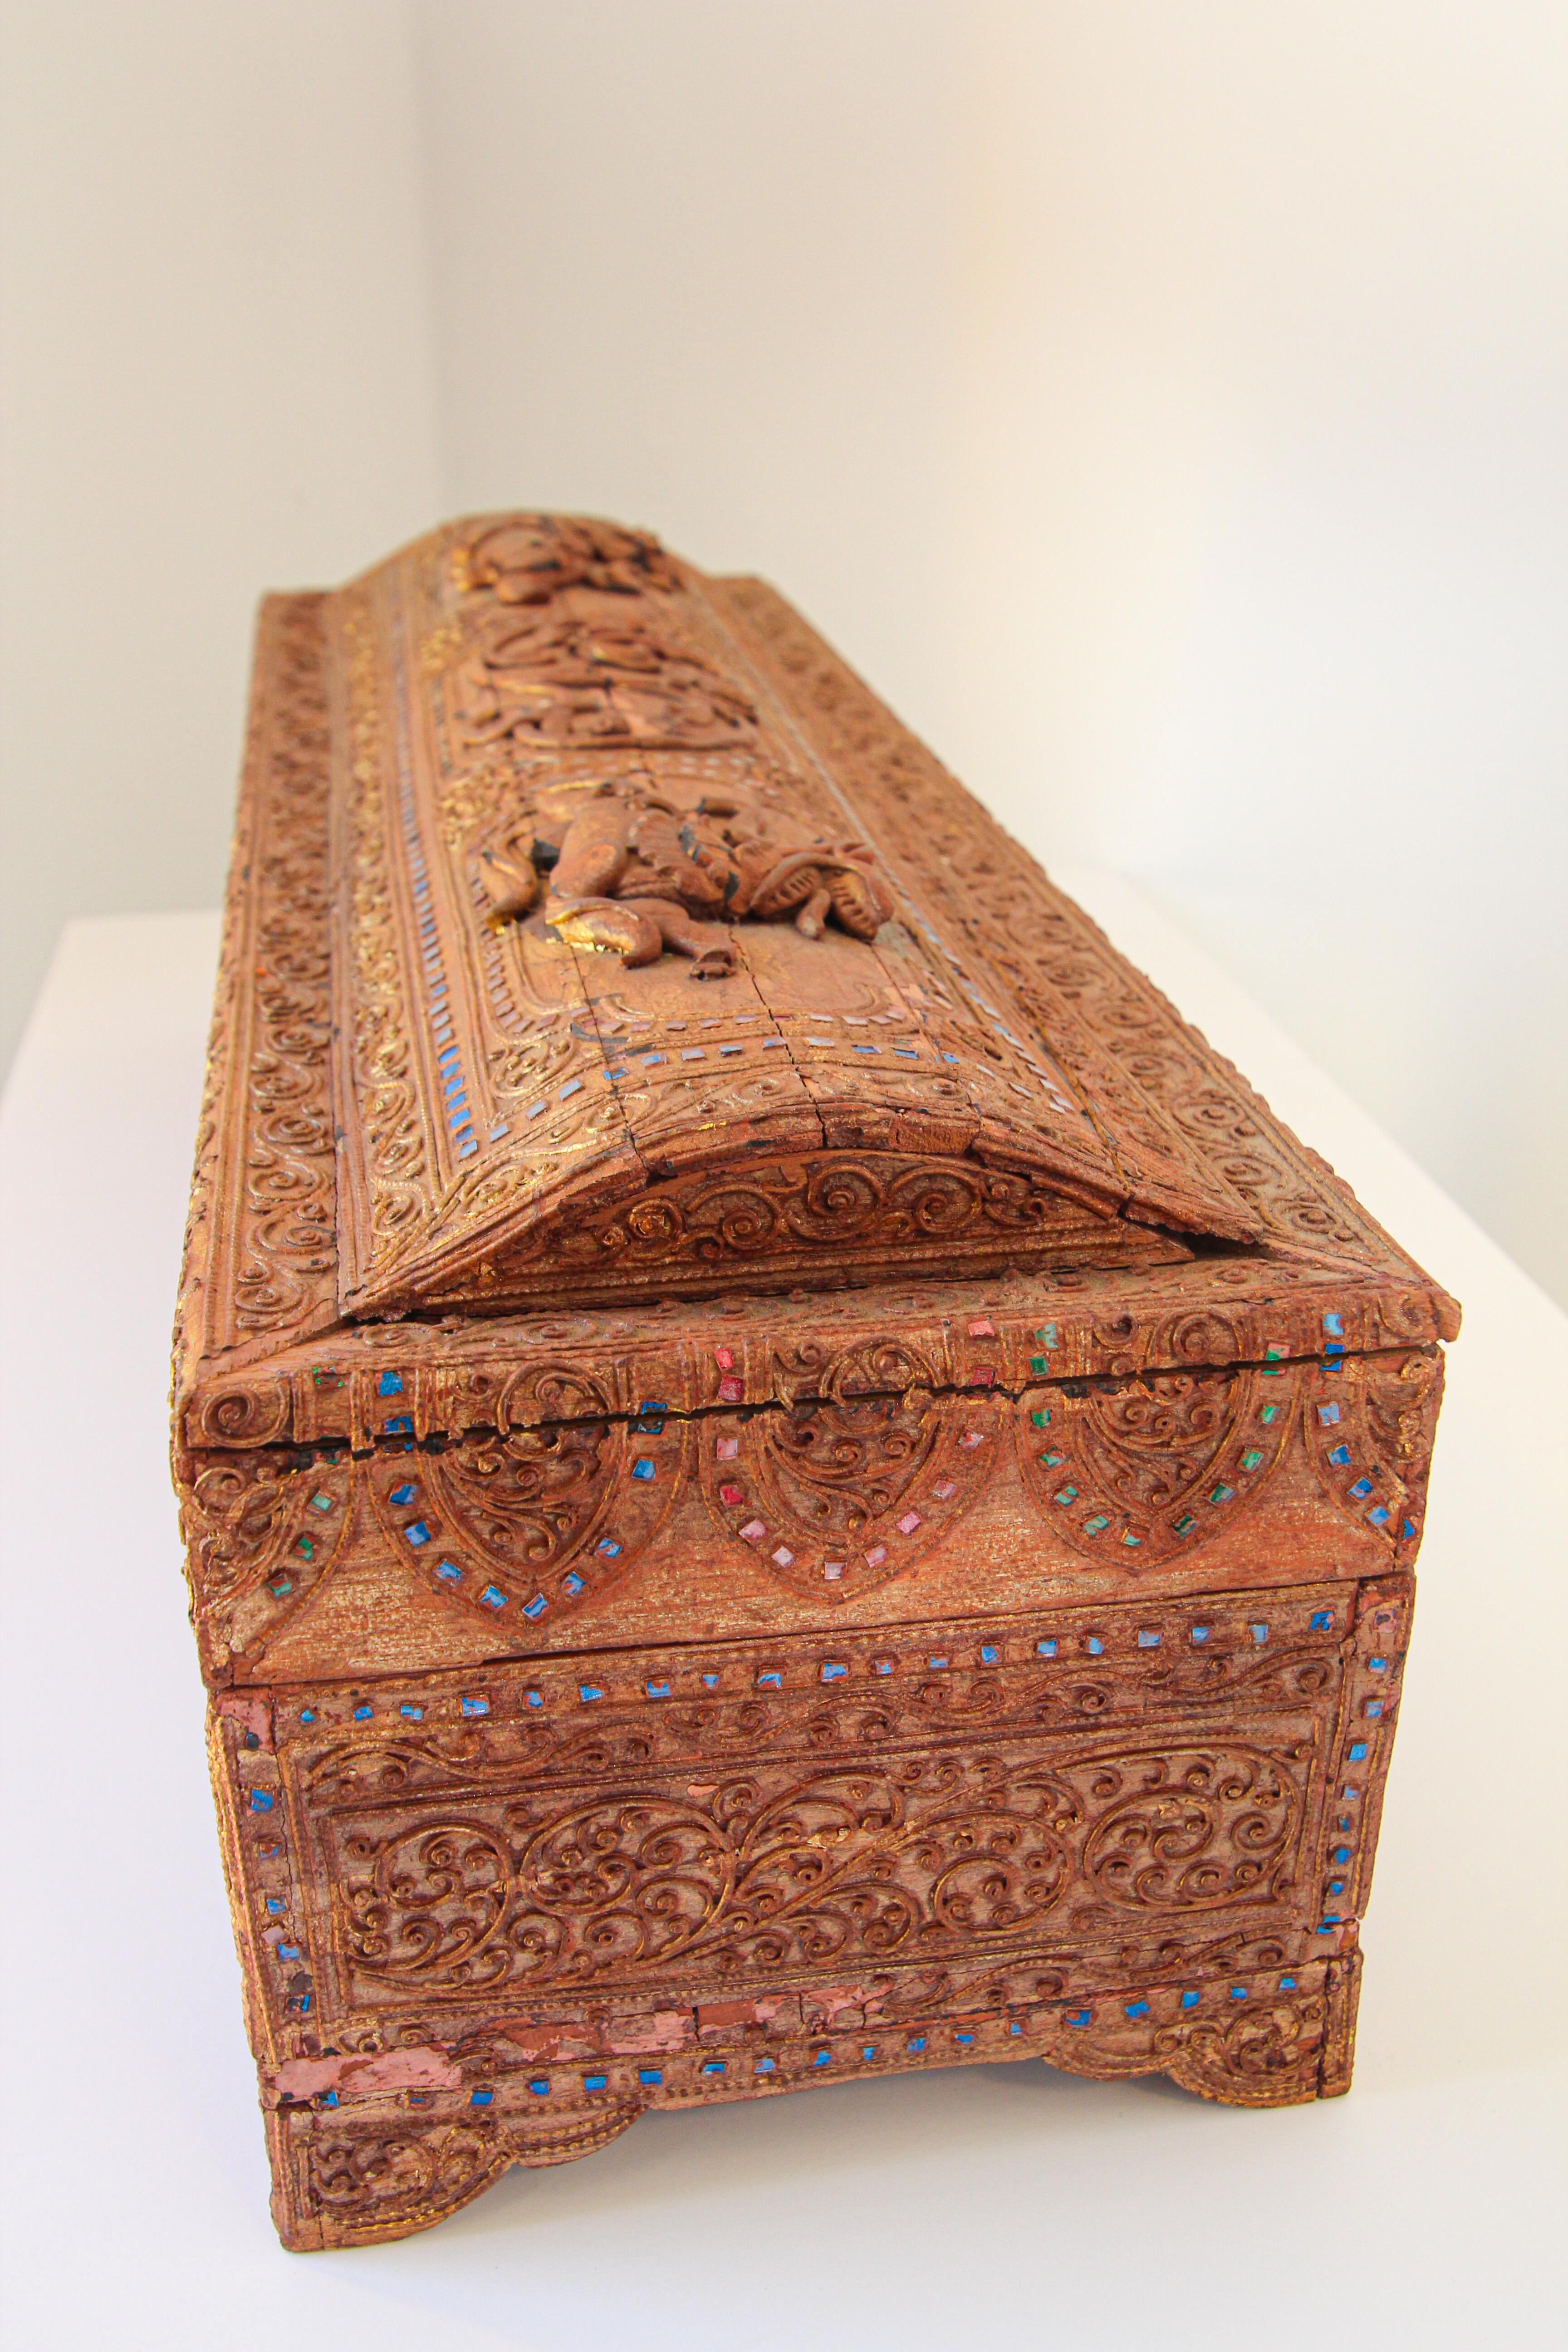 Other Gilt Lacquer Wood Manuscript Storage Box Burma 19th Century For Sale